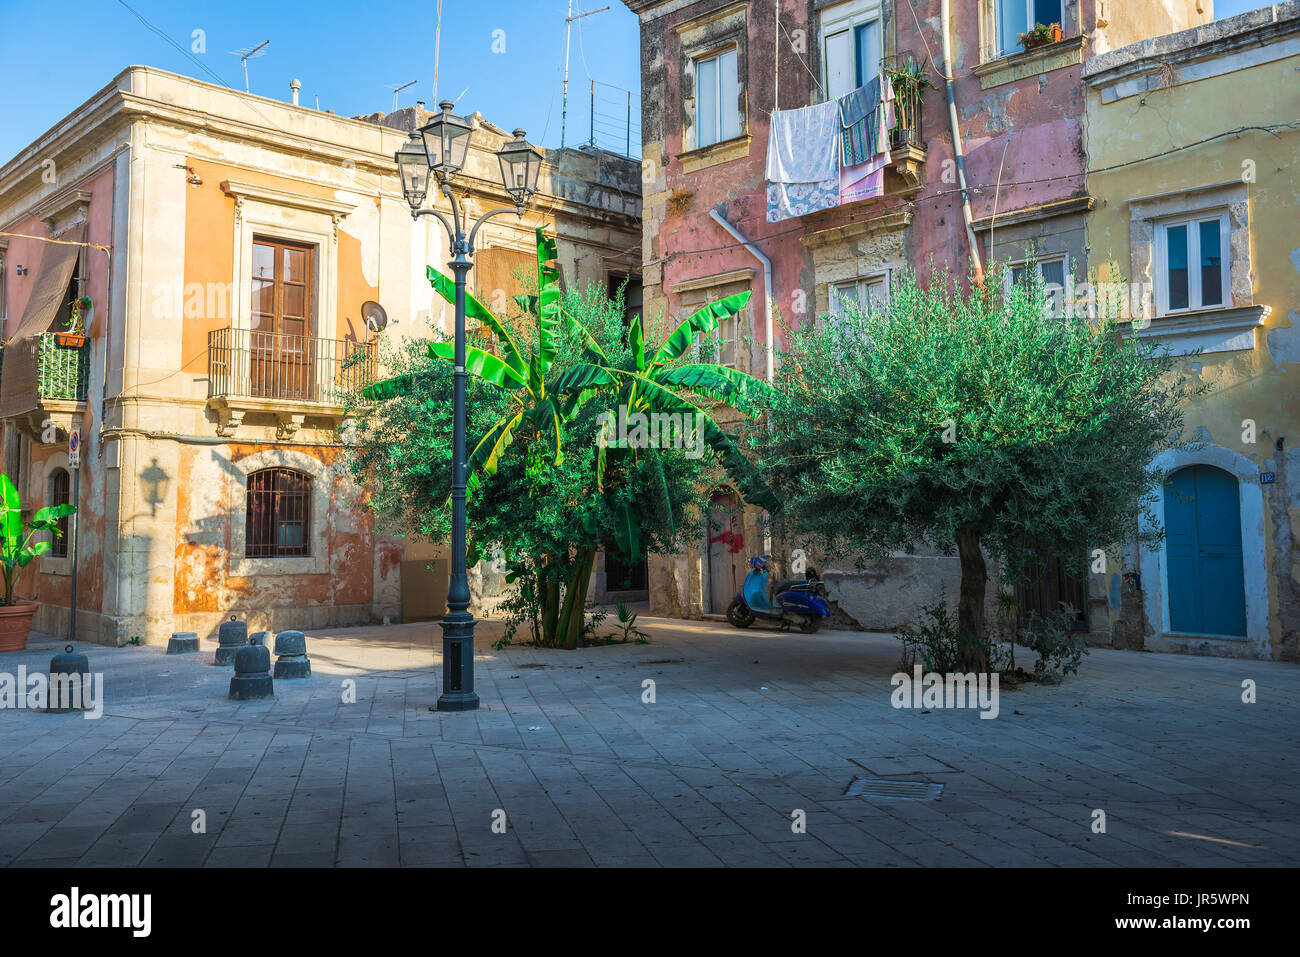 Ortigia Sicily old town, view in summer of a small enclosed piazza in the historic old town quarter of Ortigia, Syracuse (Siracusa), Sicily. Stock Photo